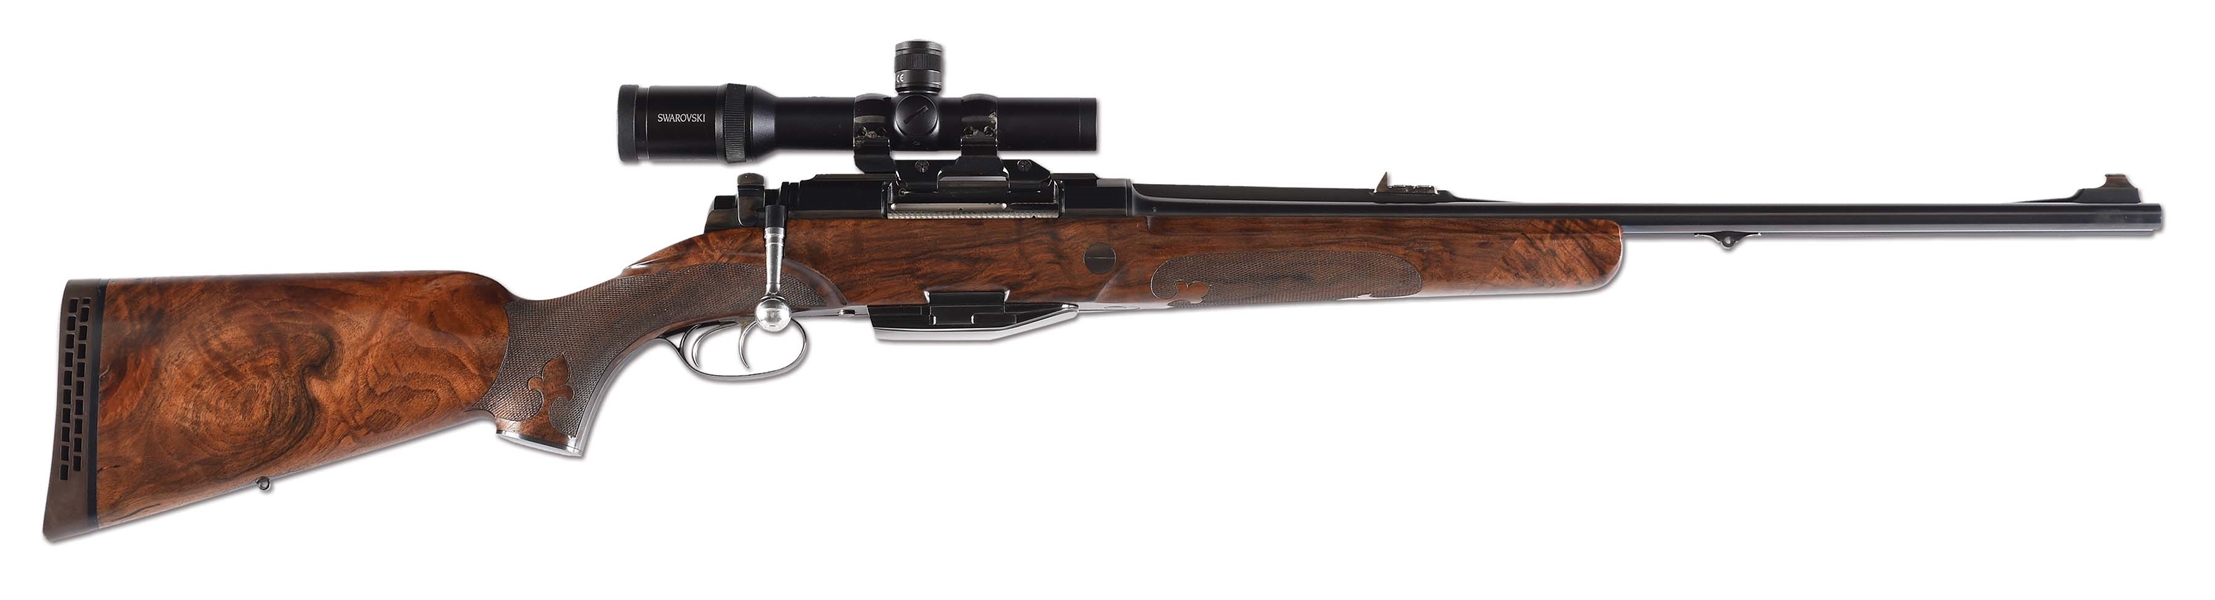 (M) INNOVATIVE SZECSEI & FUCHS BOLT ACTION DANGEROUS GAME DOUBLE RIFLE WITH SPARE MAGAZINE AND SCOPE- SERIAL NUMBER 004!.